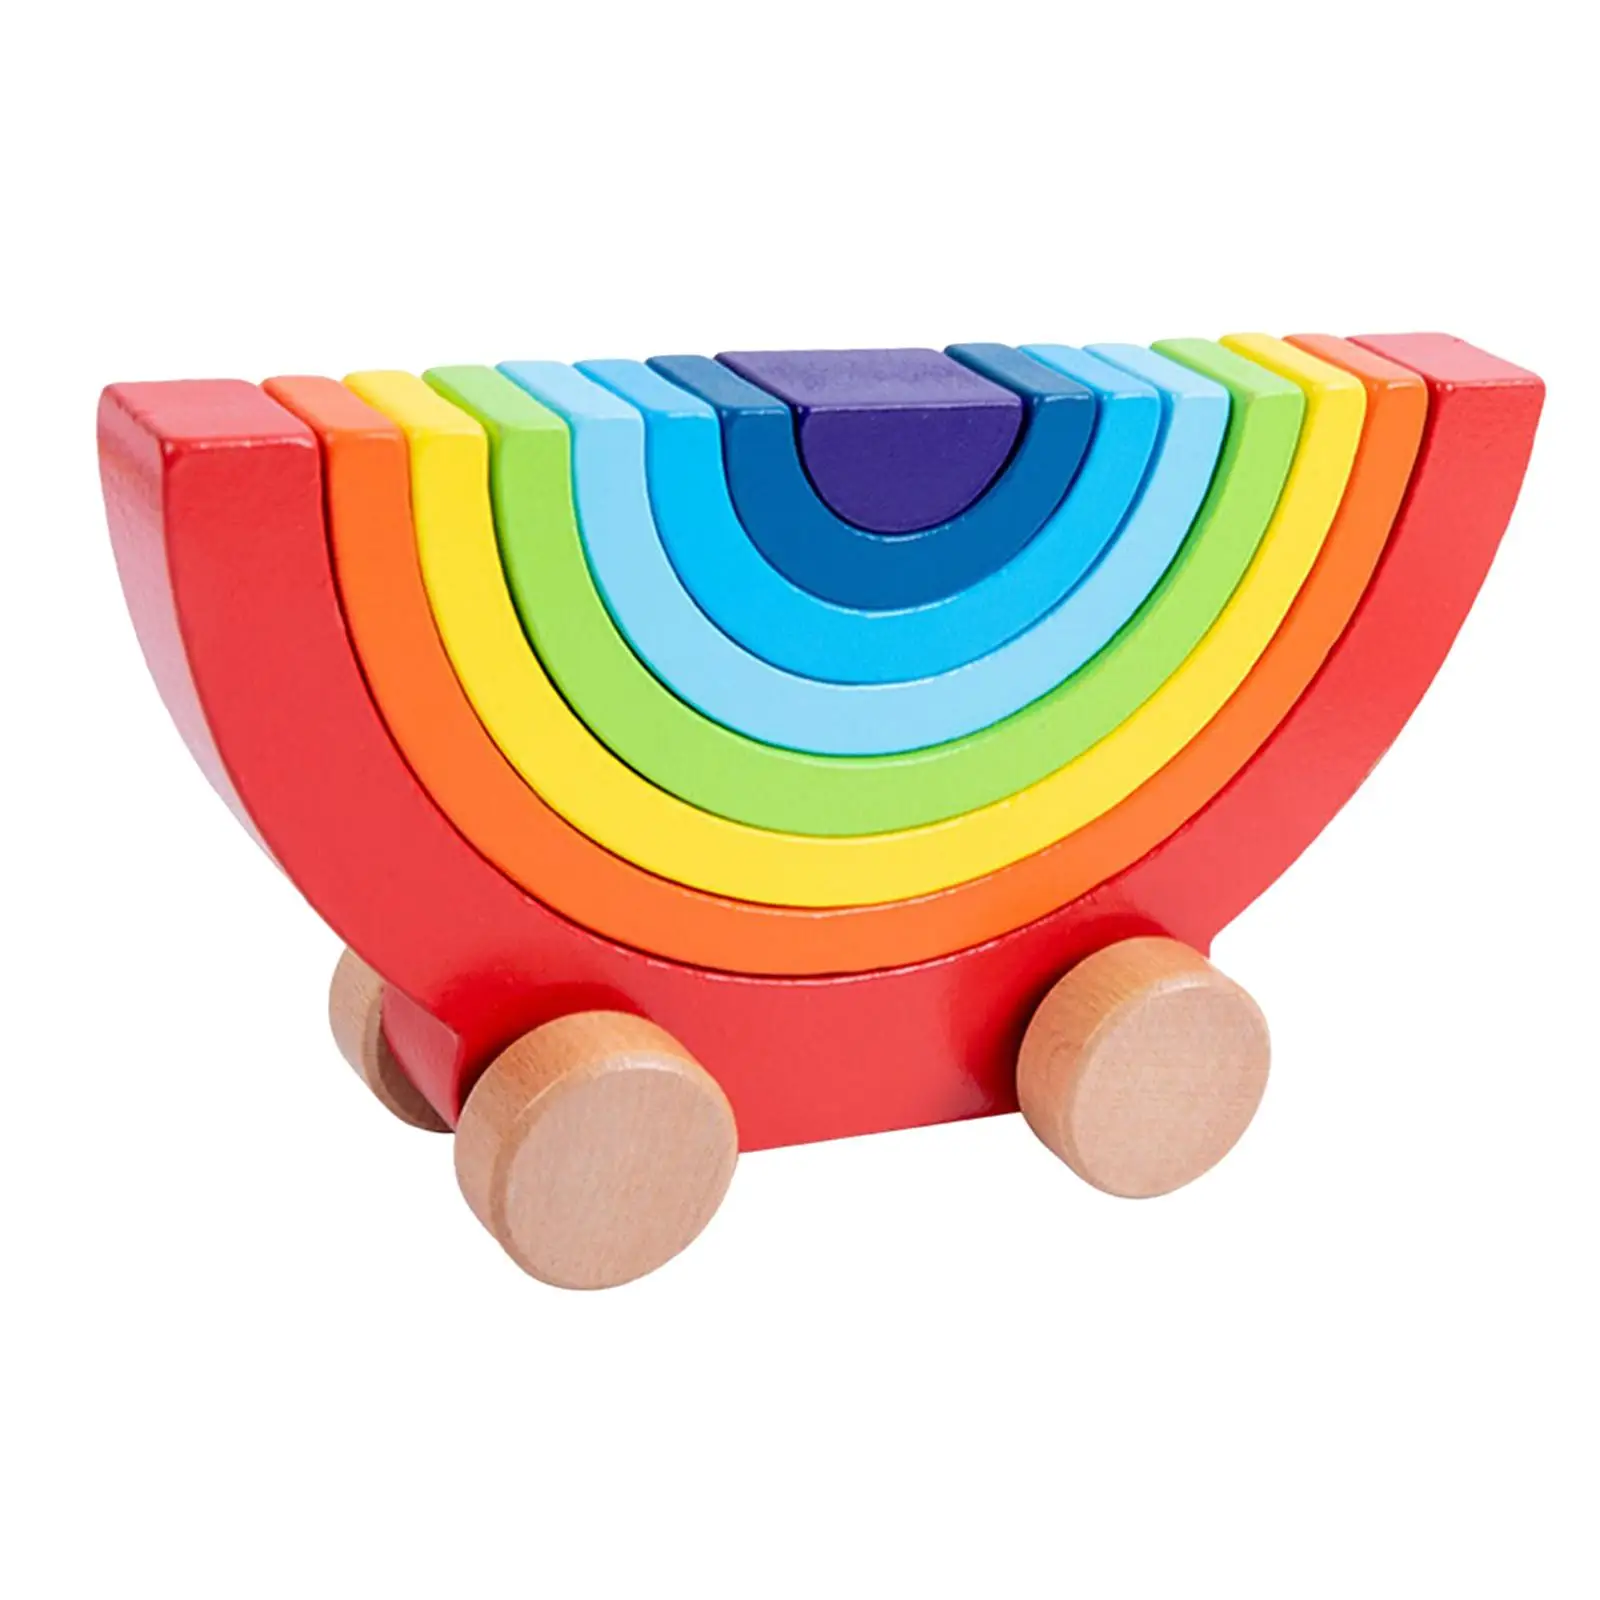 Wooden Building Blocks Car Toy Stacking Stacker Gift Decoration for Toddlers